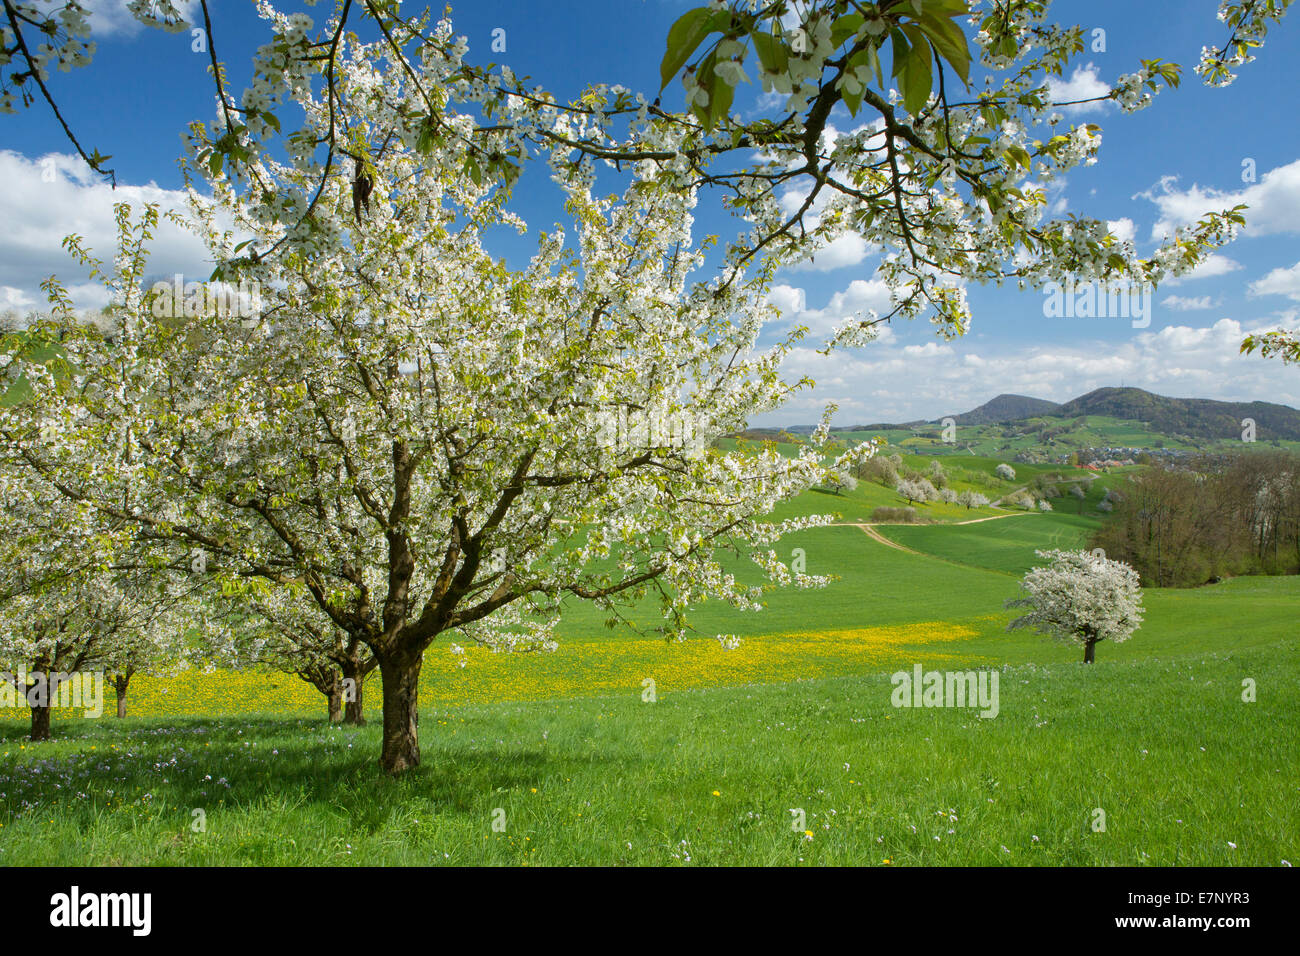 Fricktal, cherry trees, spring, canton, AG, Aargau, tree, trees, scenery, landscape, agriculture, Switzerland, Europe, Stock Photo